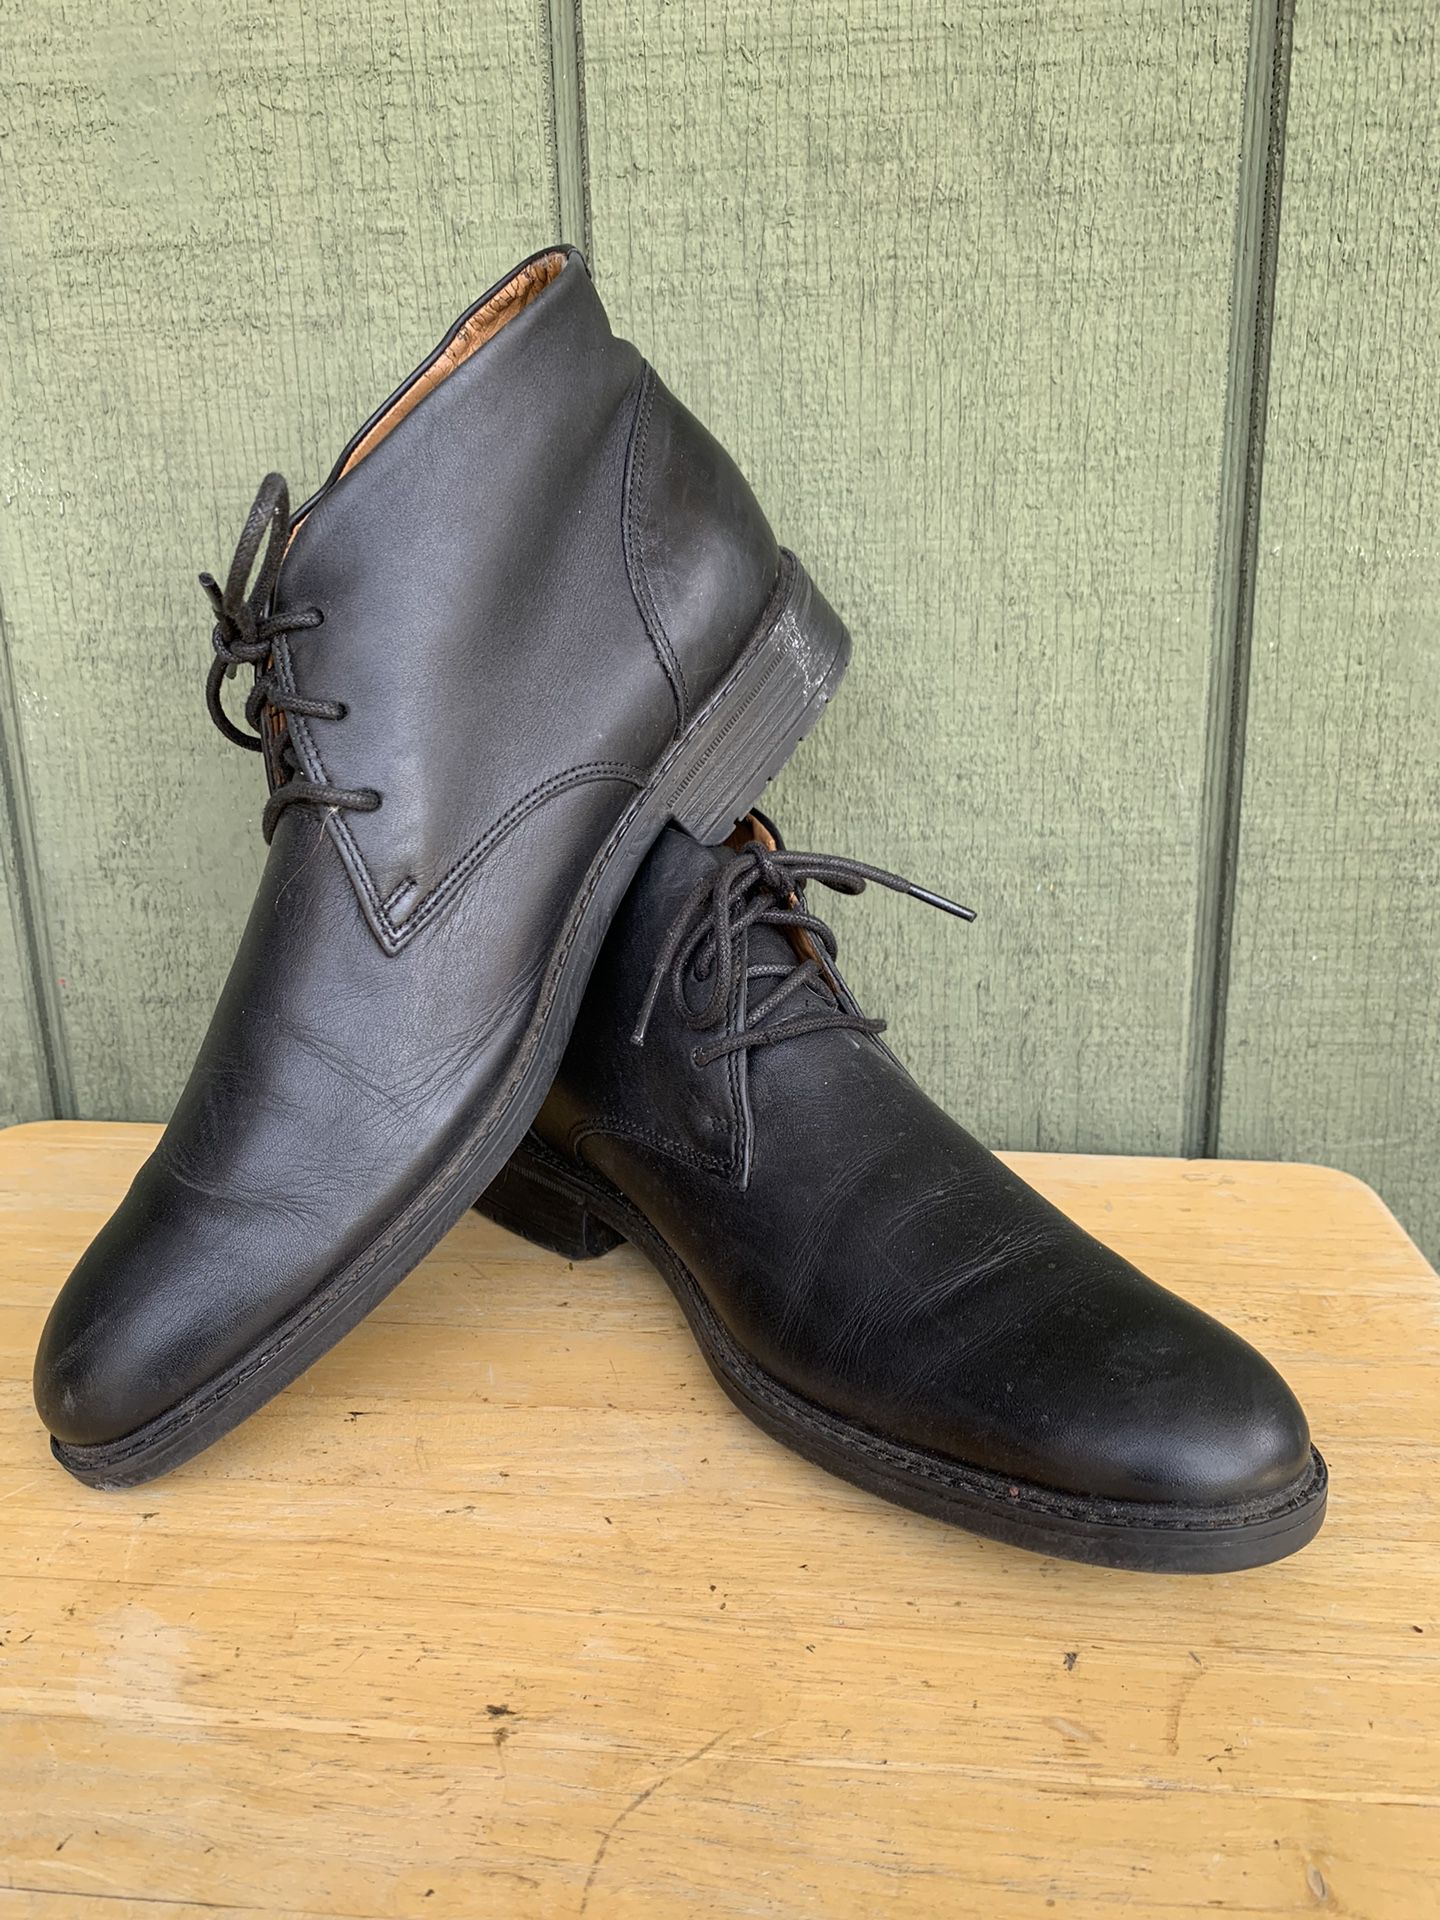 Clarks Chukka Boots Mens M Cushion Plus Black Leather Shoes Booties for Sale West Covina, CA - OfferUp